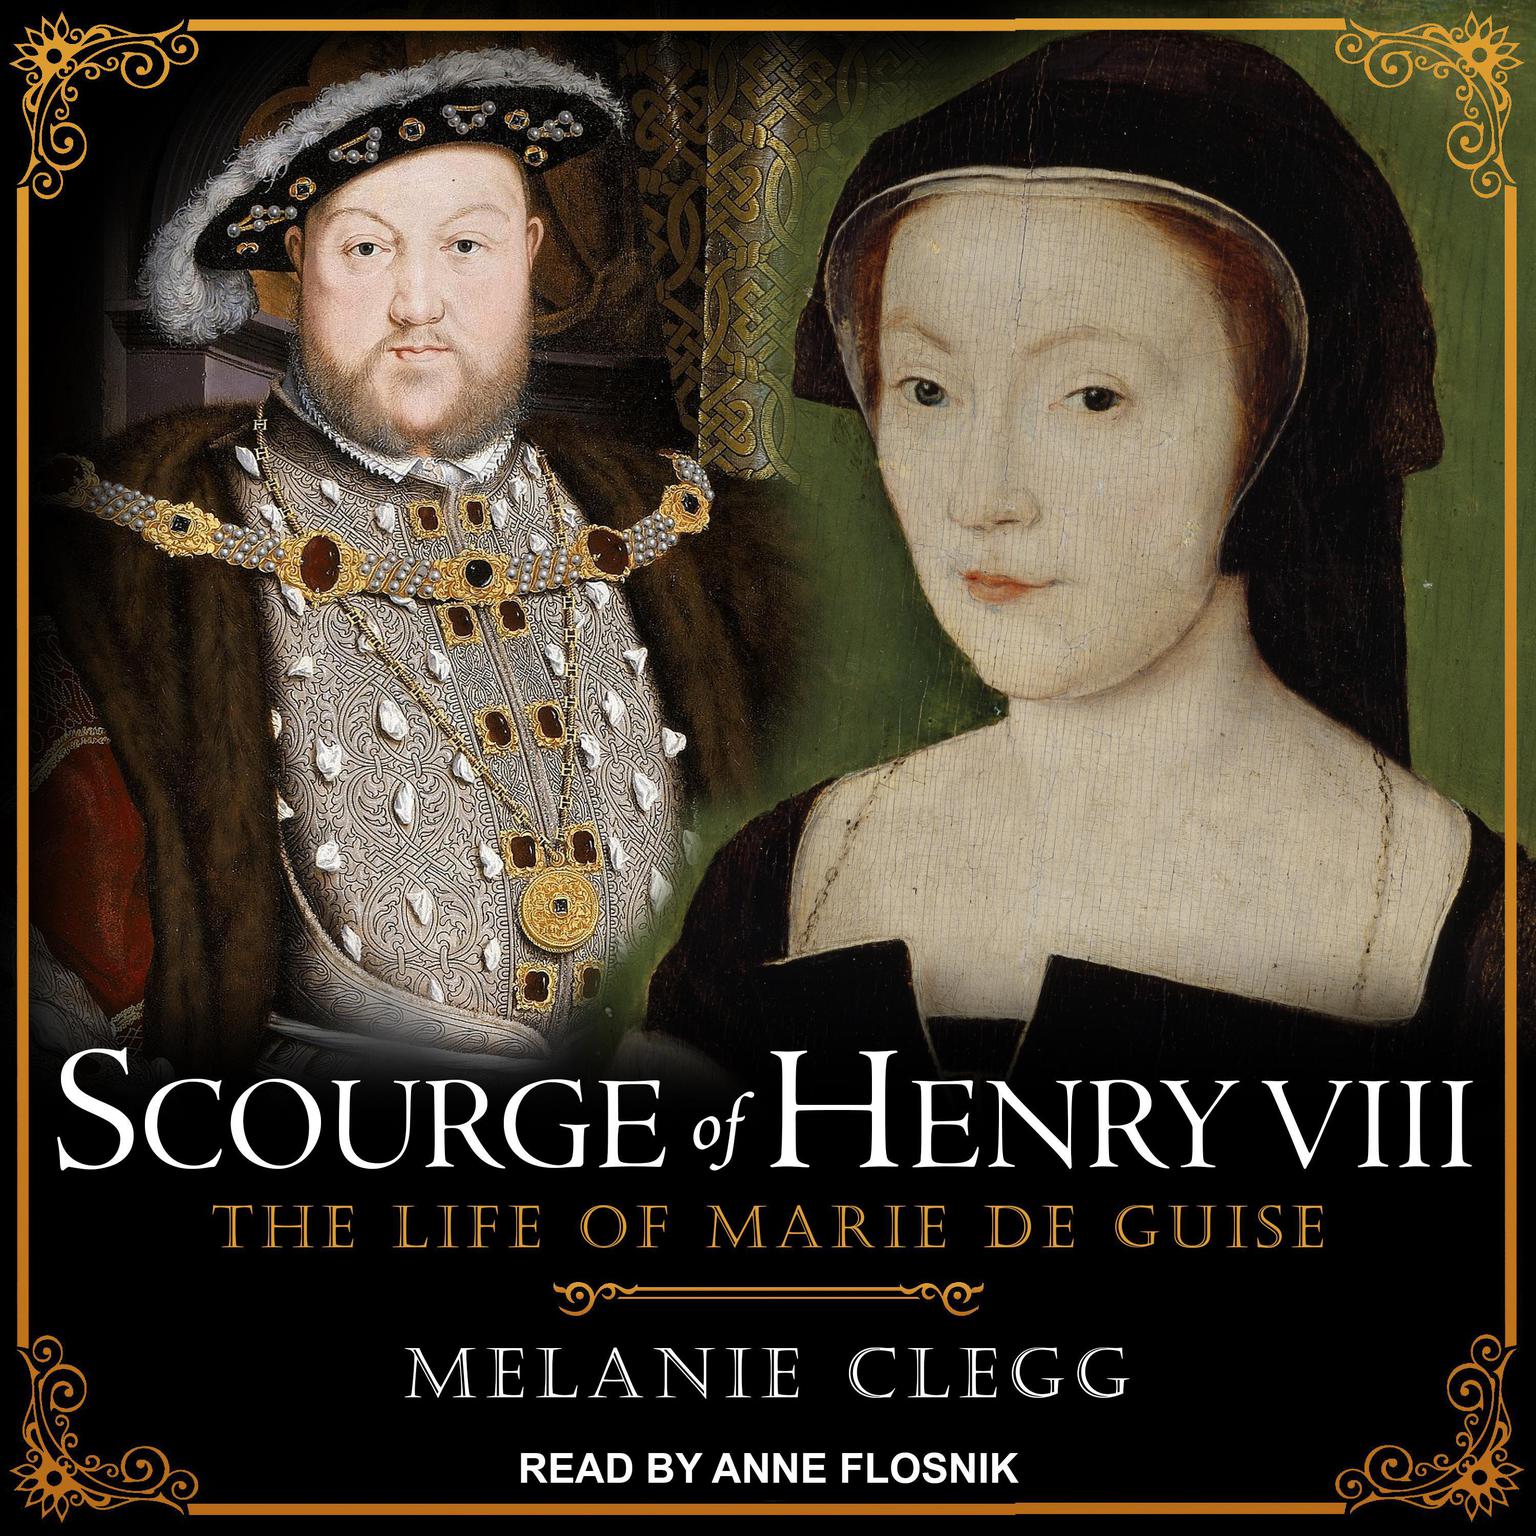 Scourge of Henry VIII: The Life of Marie de Guise Audiobook, by Melanie Clegg